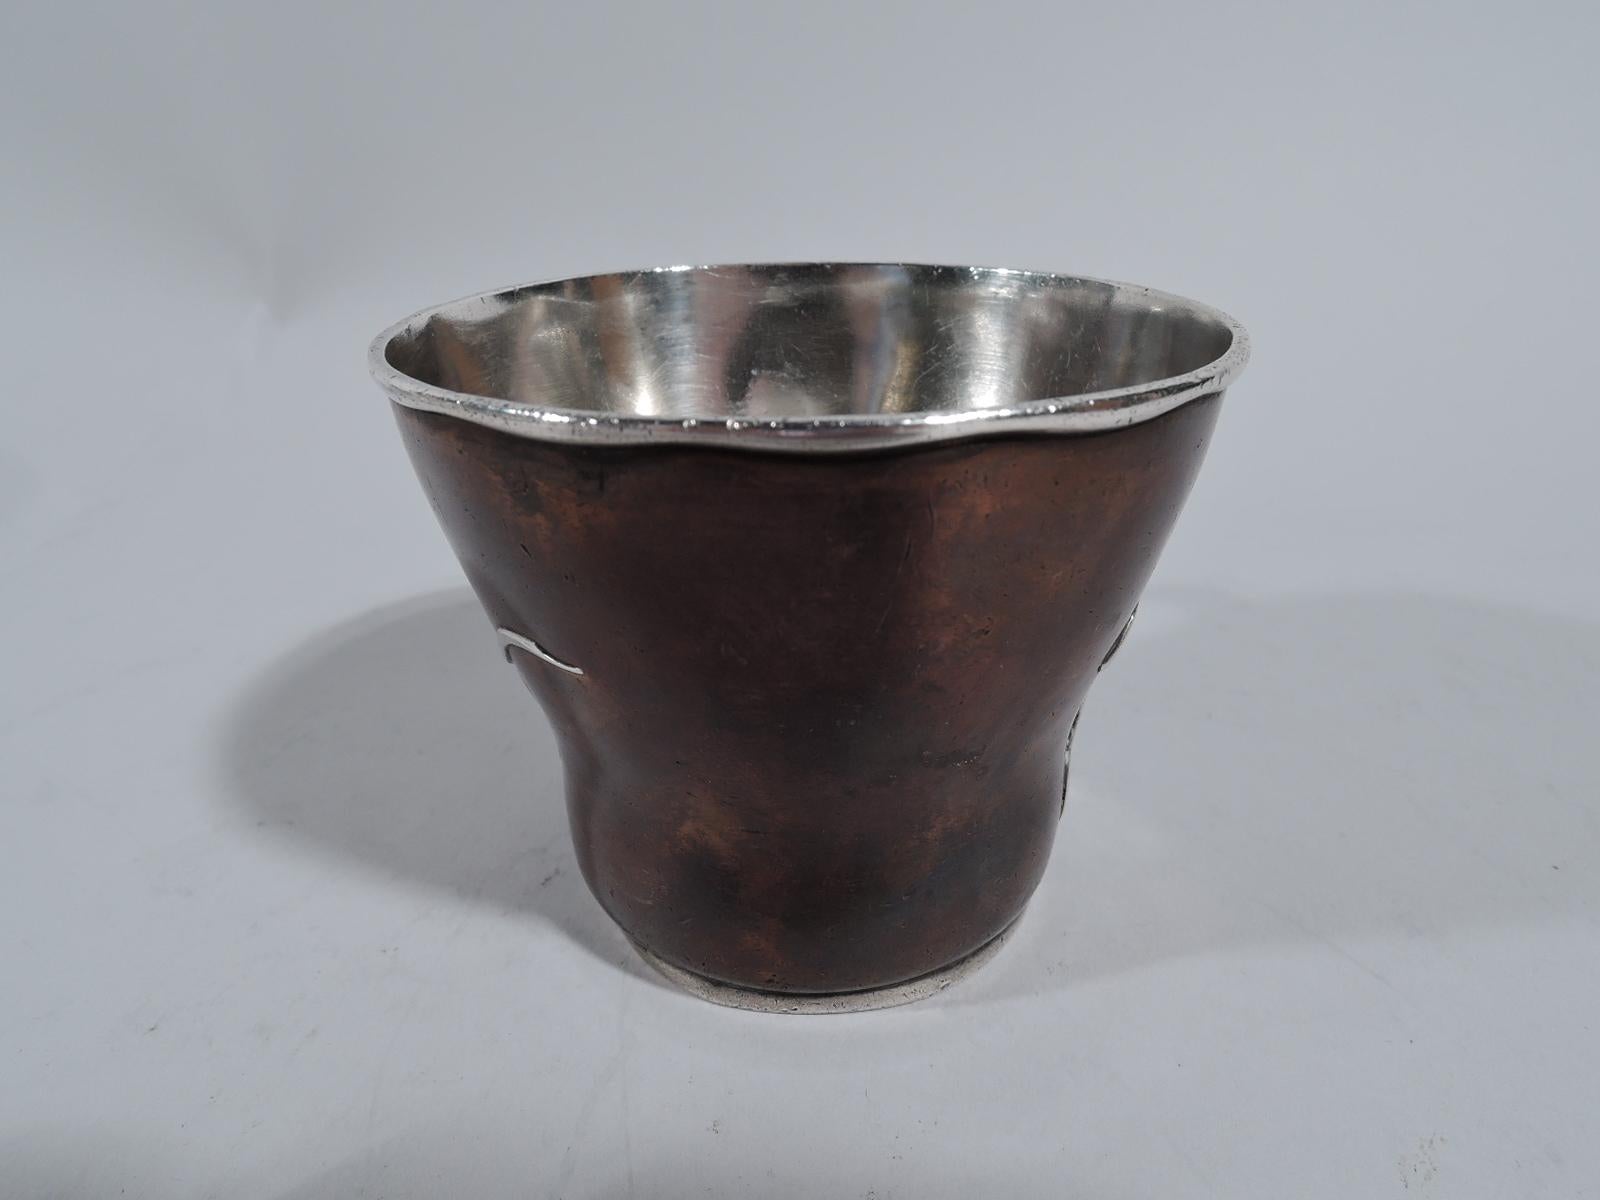 Aesthetic Japonesque mixed metal christening mug. Made by Tiffany & Co. in New York, circa 1879. Tapering copper body applied with silver tendril and leaf. Silver scroll handle, foot ring, and wavy rim. Interior also silver with visible handwork.